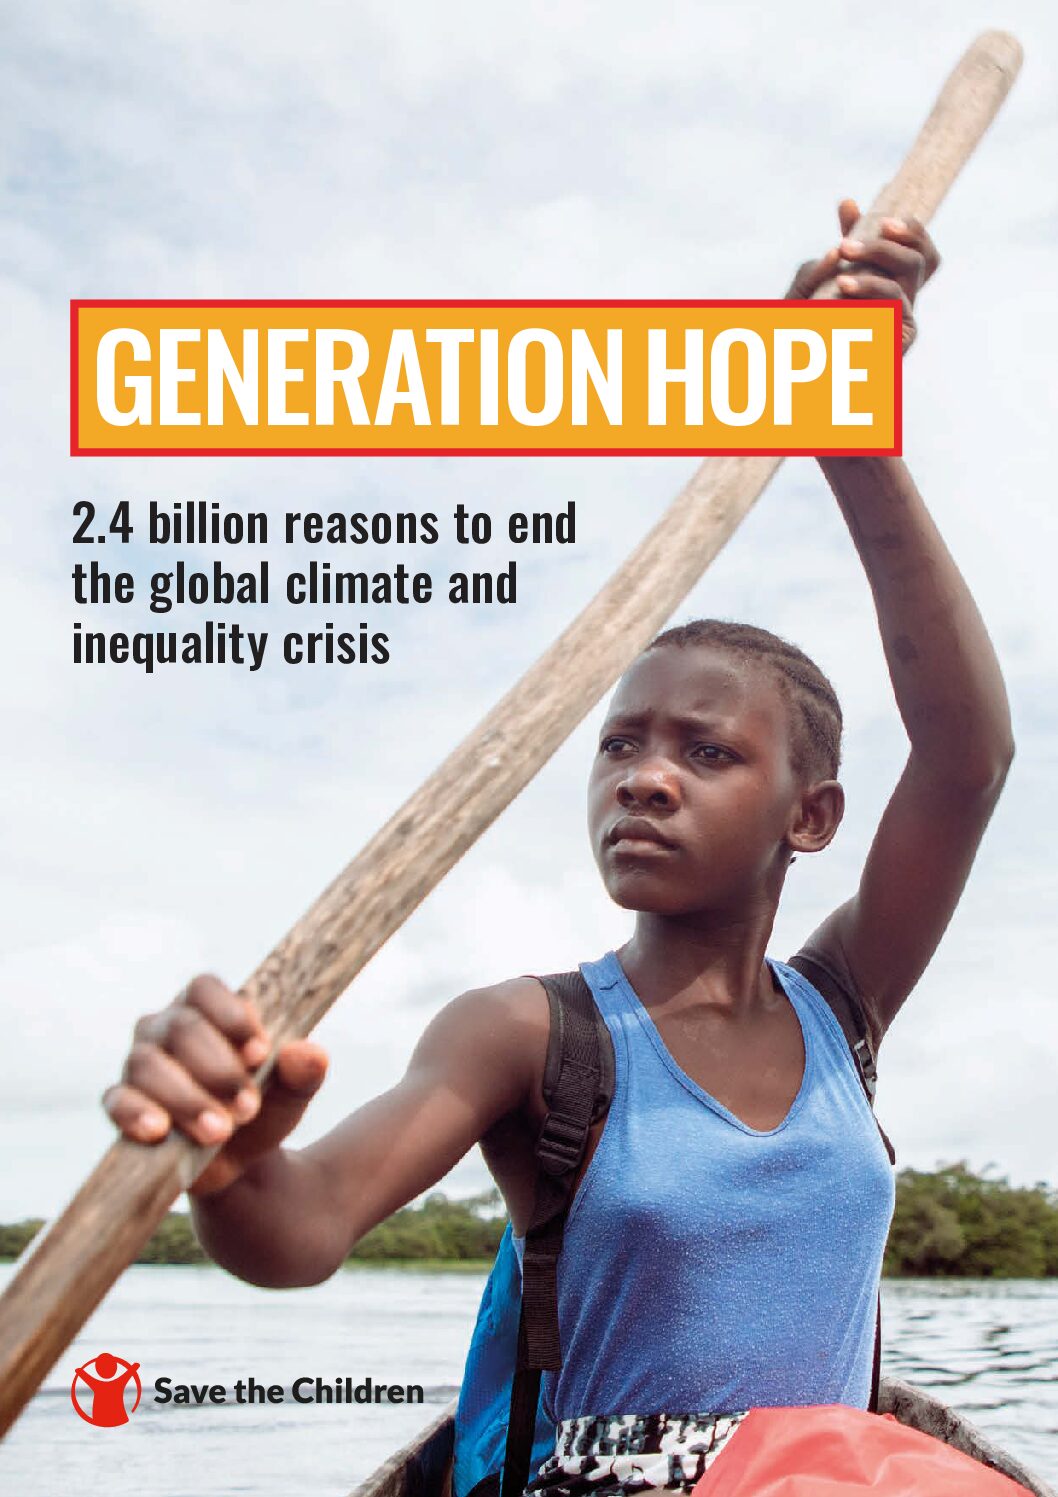 Generation Hope: 2.4 billion reasons to end the global climate and inequality crisis. 